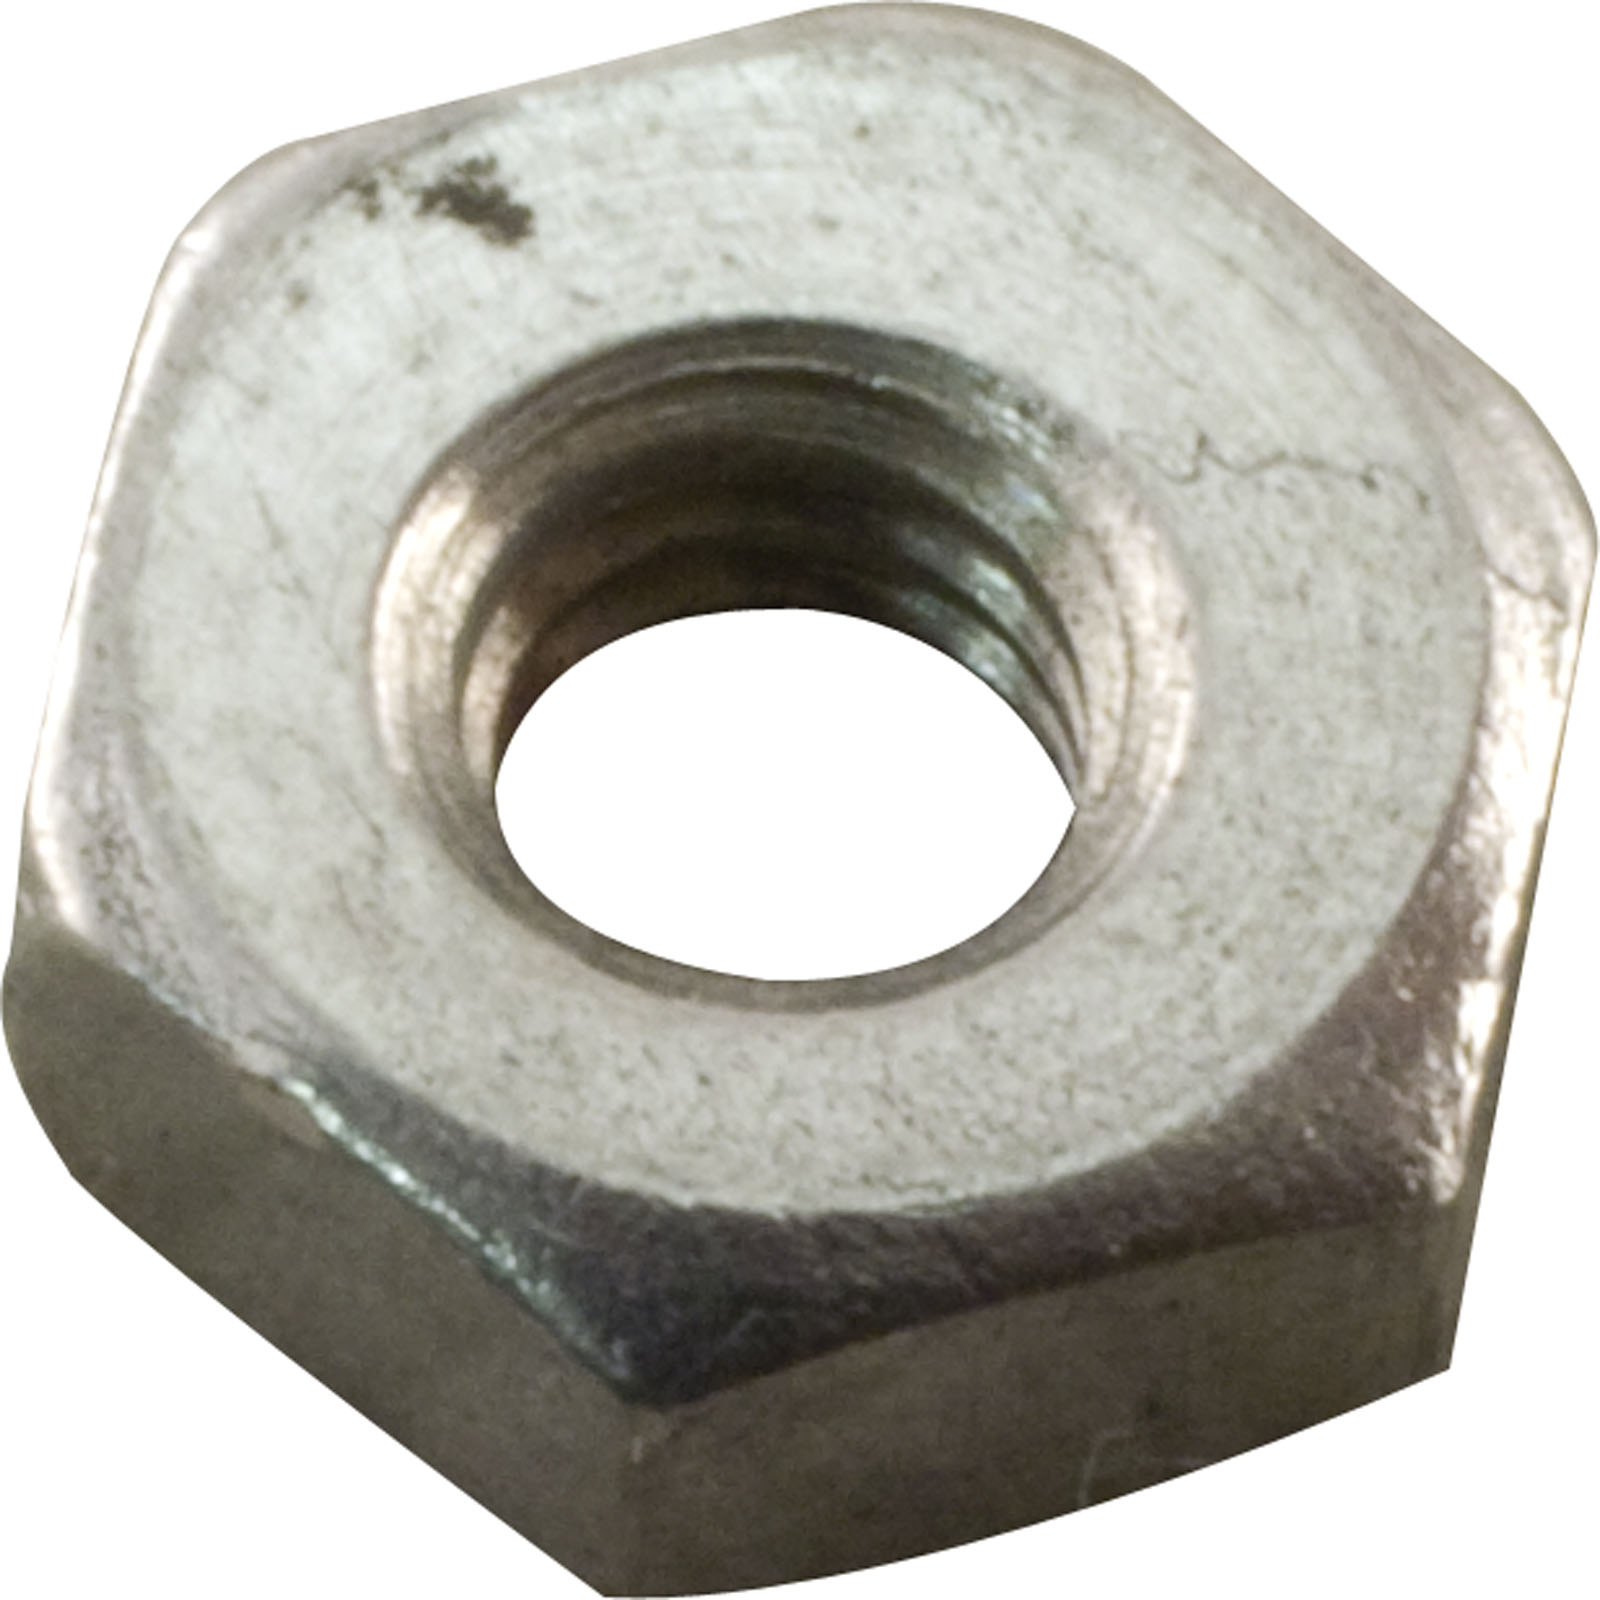 Picture of 619312 Sight Glass Nut Pentair 8-32